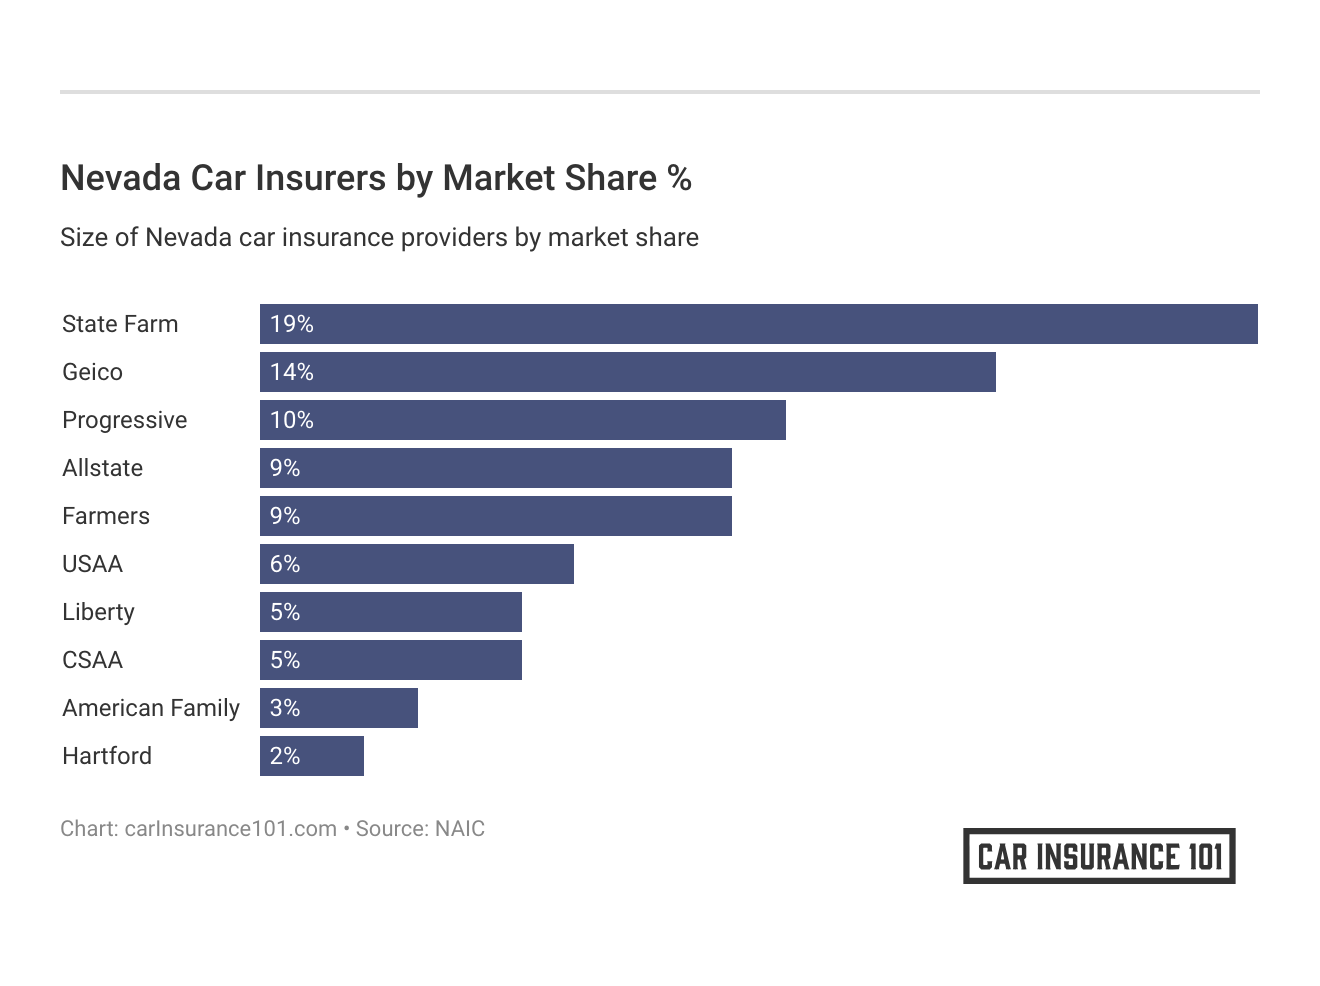 <h3>Nevada Car Insurers by Market Share %</h3>